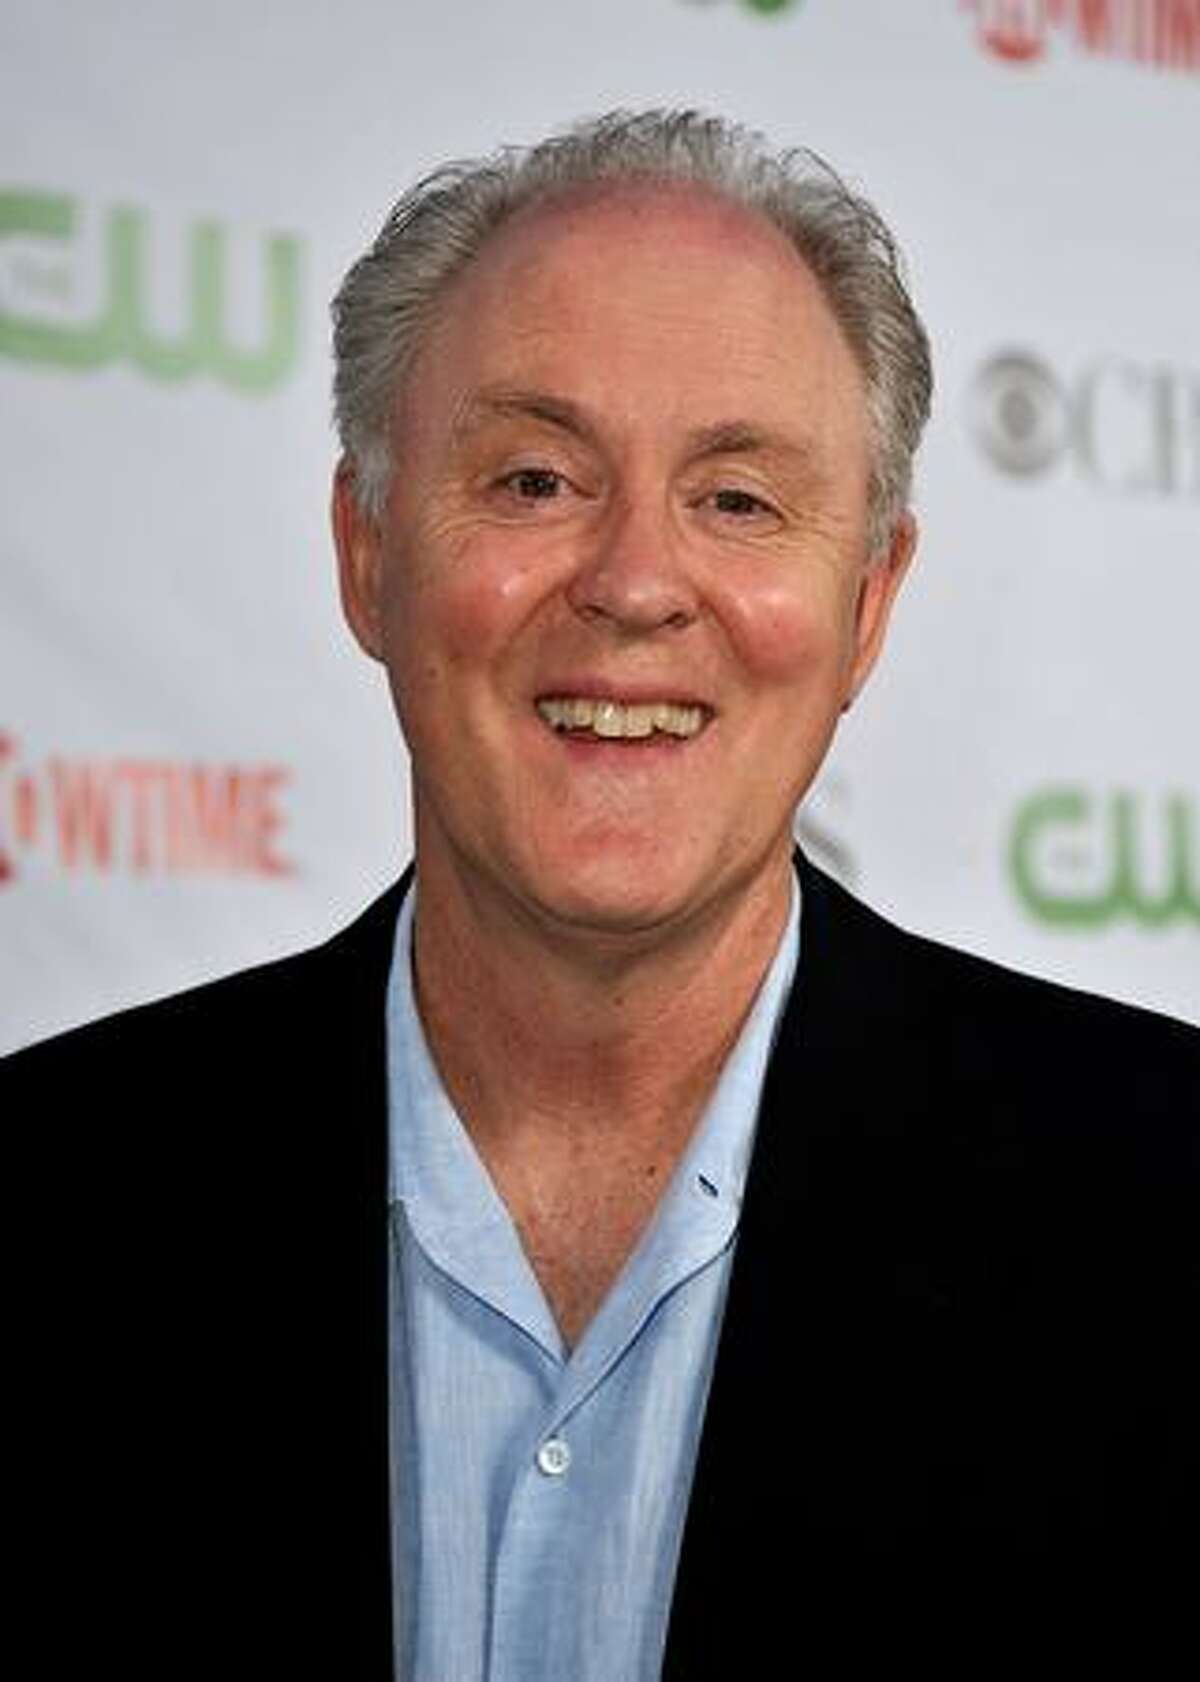 Actor John Lithgow arrives at the CBS, CW, CBS Television Studios & Showtime TCA party held at the Huntington Library in Pasadena, California.